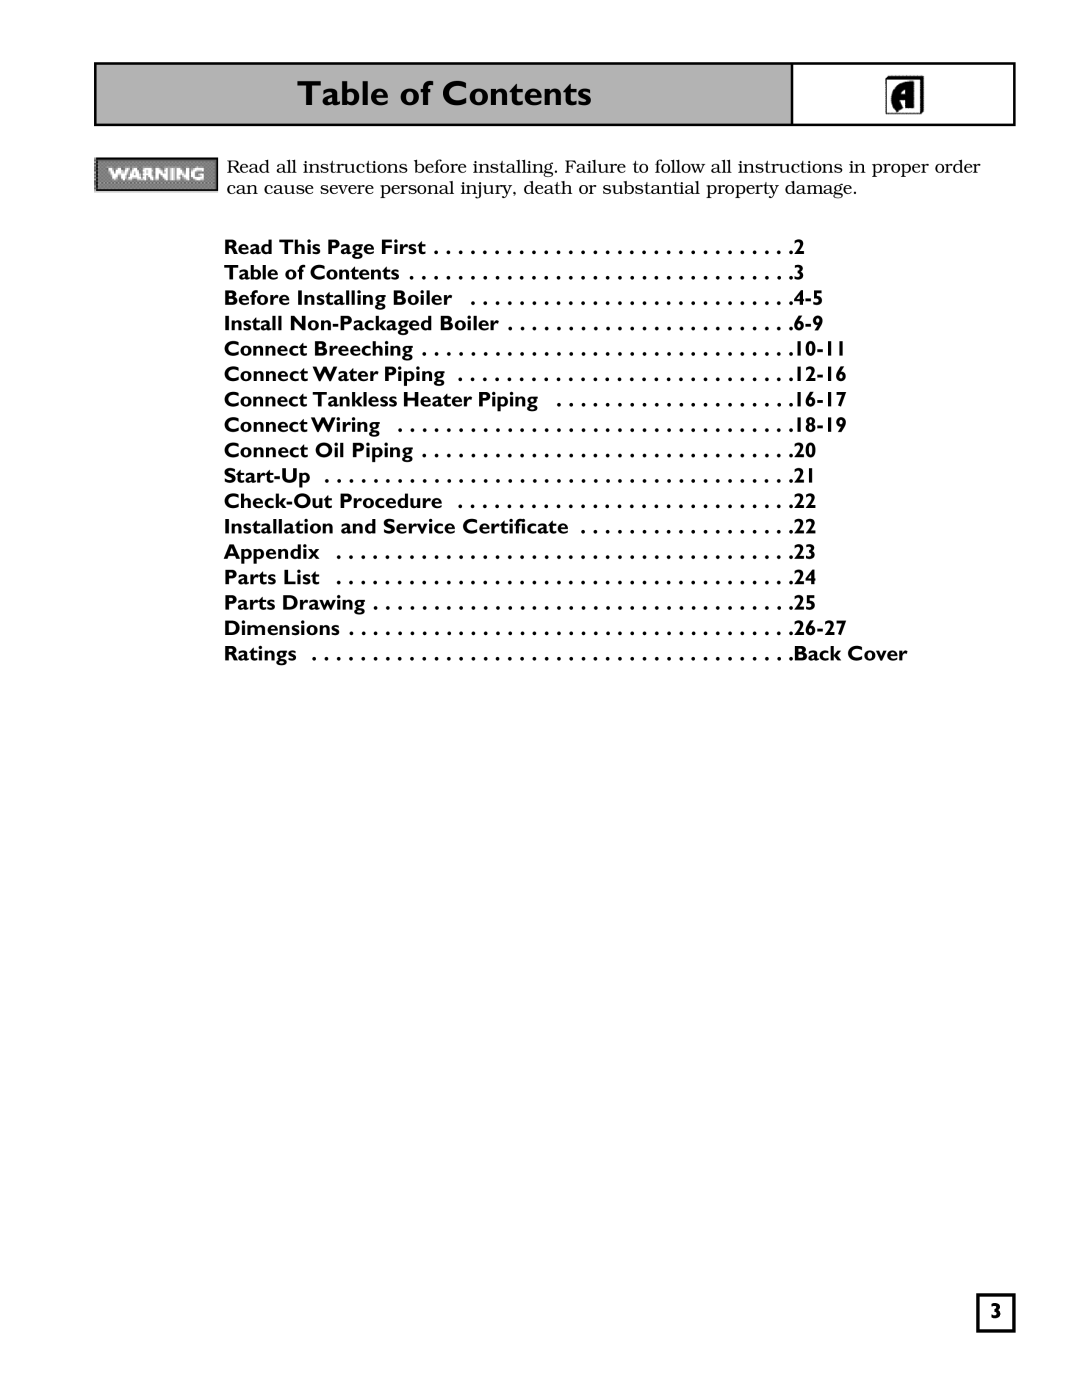 Weil-McLain SGO-W SERIES 3 OIL-FIRED NATURAL DRAFT WATER BOILER Table of Contents, Read This Page First, Connect Breeching 